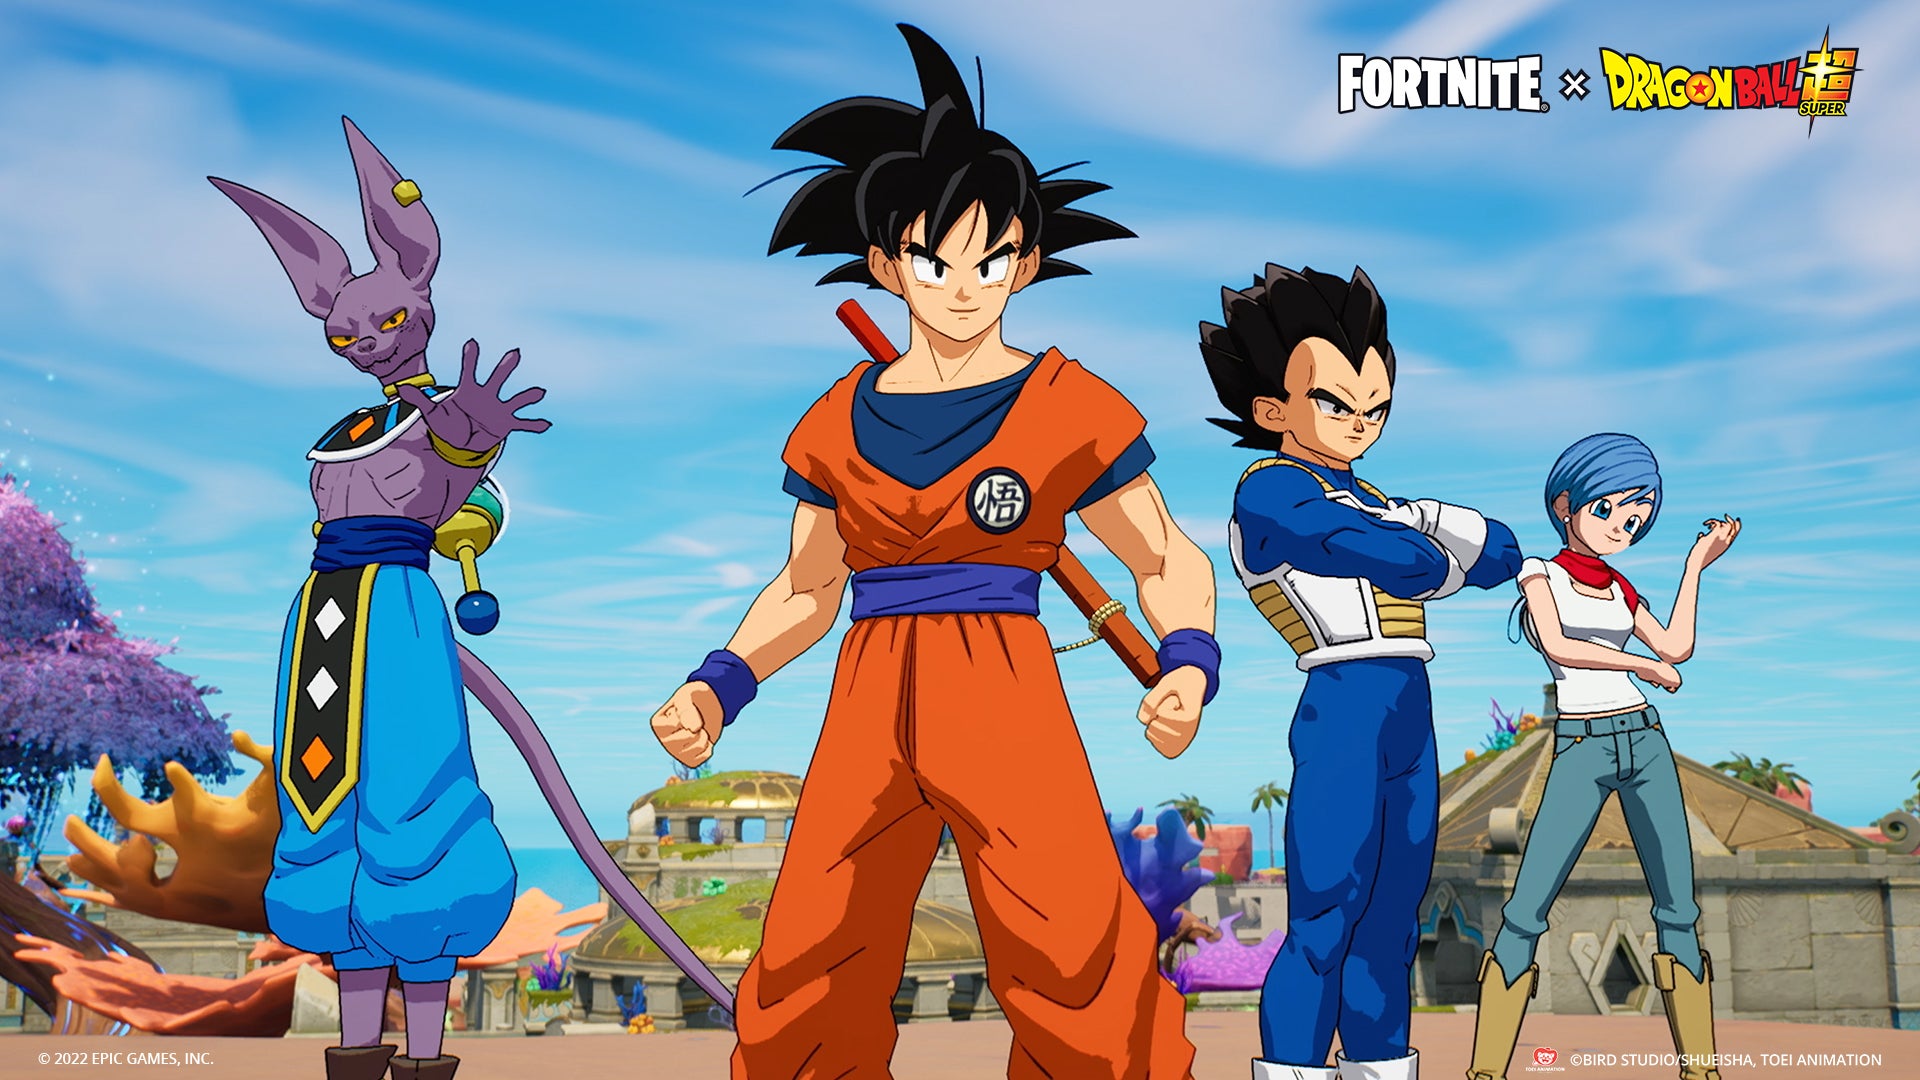 The Fortnite x Dragon Ball crossover is now live 